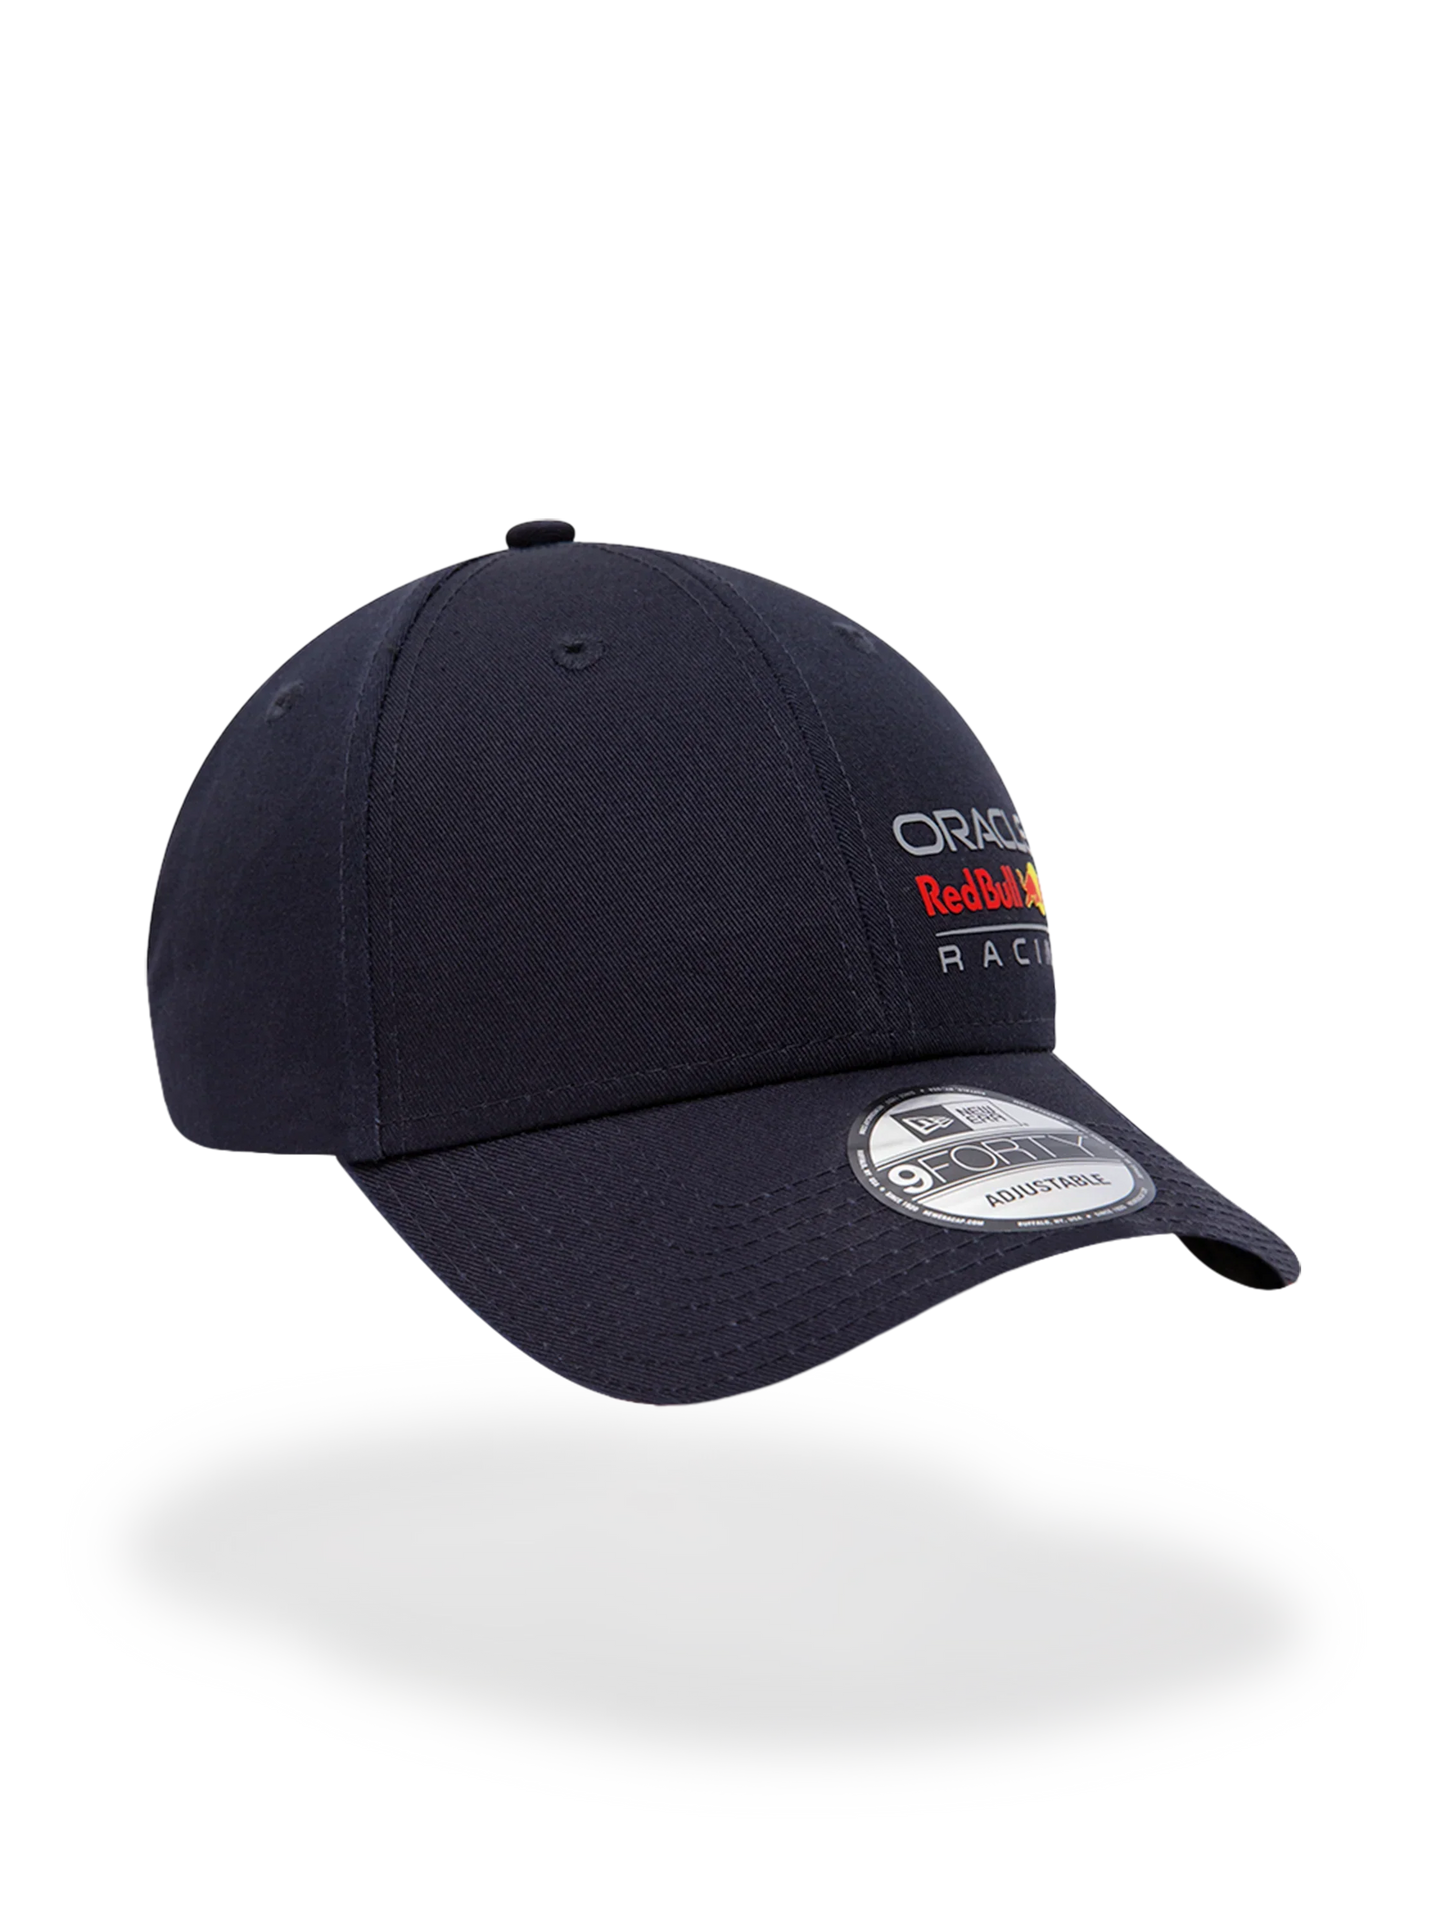 Oracle Red Bull Racing New Era 9Forty Essential cap